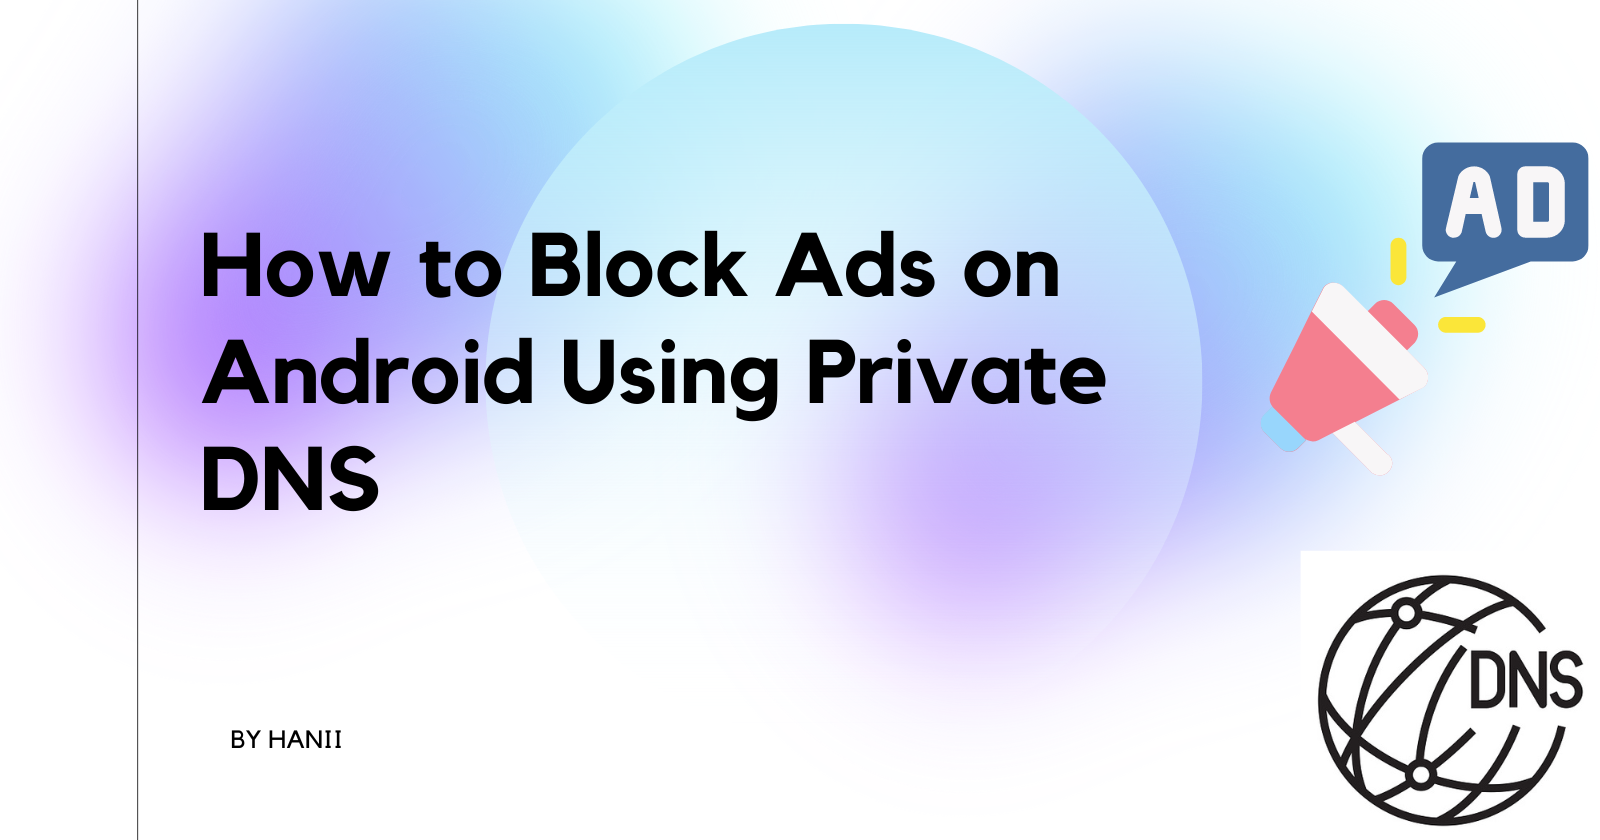 How to Block Ads on Android Using Private DNS